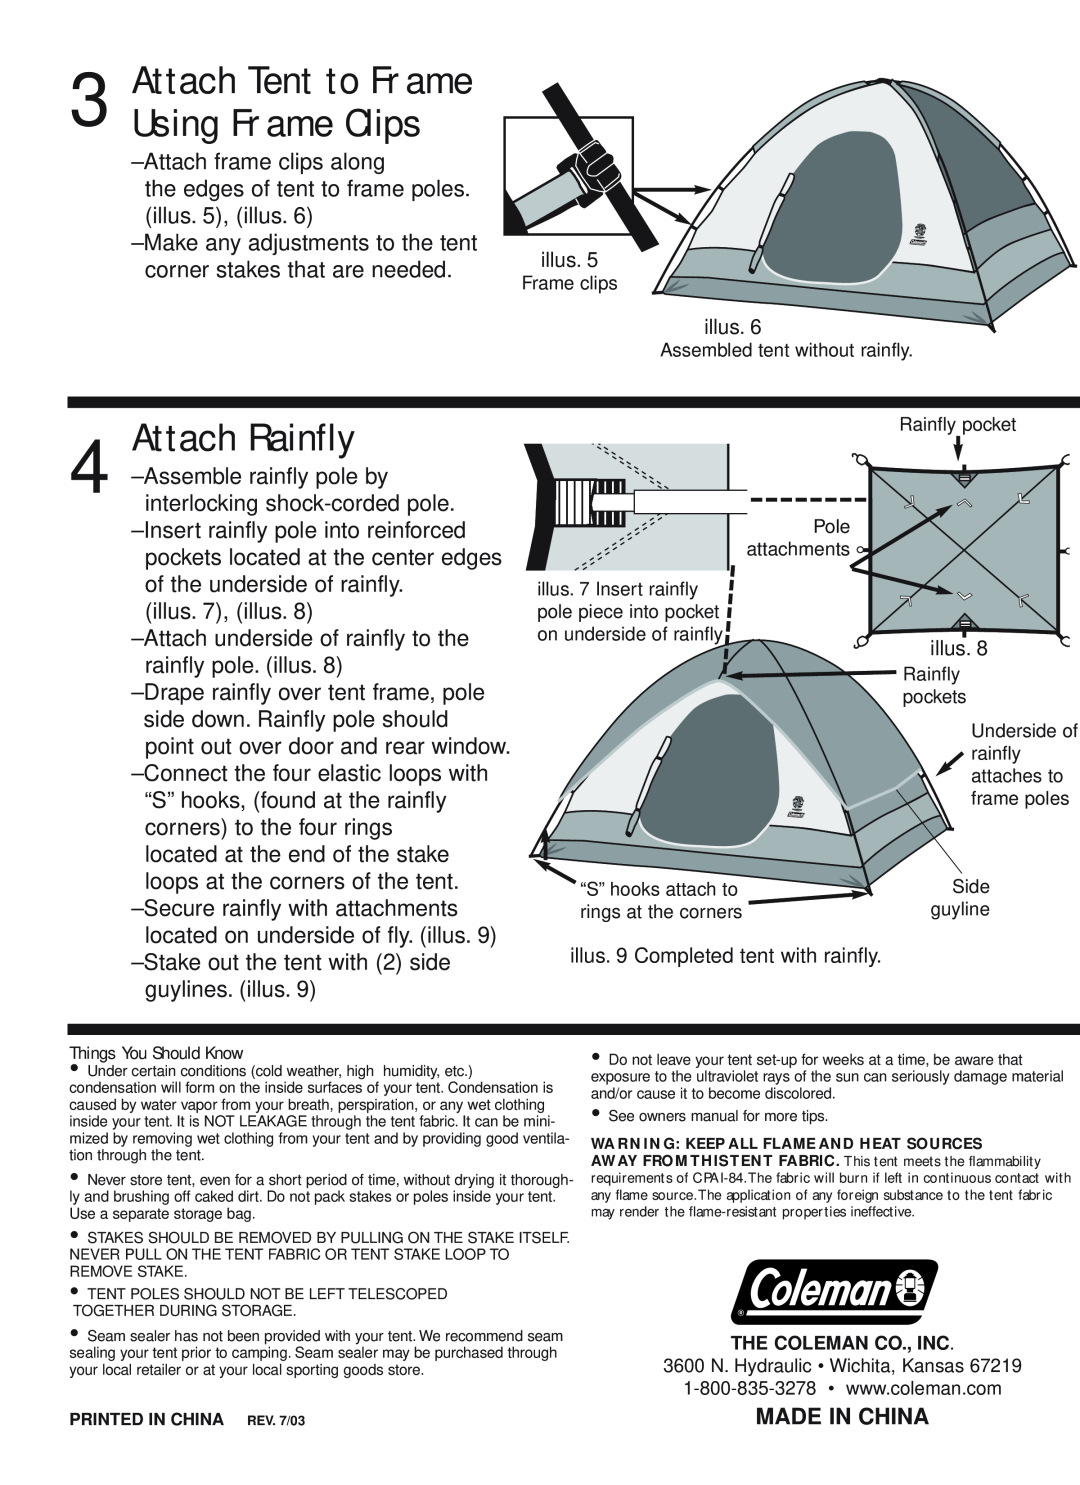 Coleman 9160N101 owner manual Attach Tent to Frame Using Frame Clips, Made In China, Attach Rainfly 